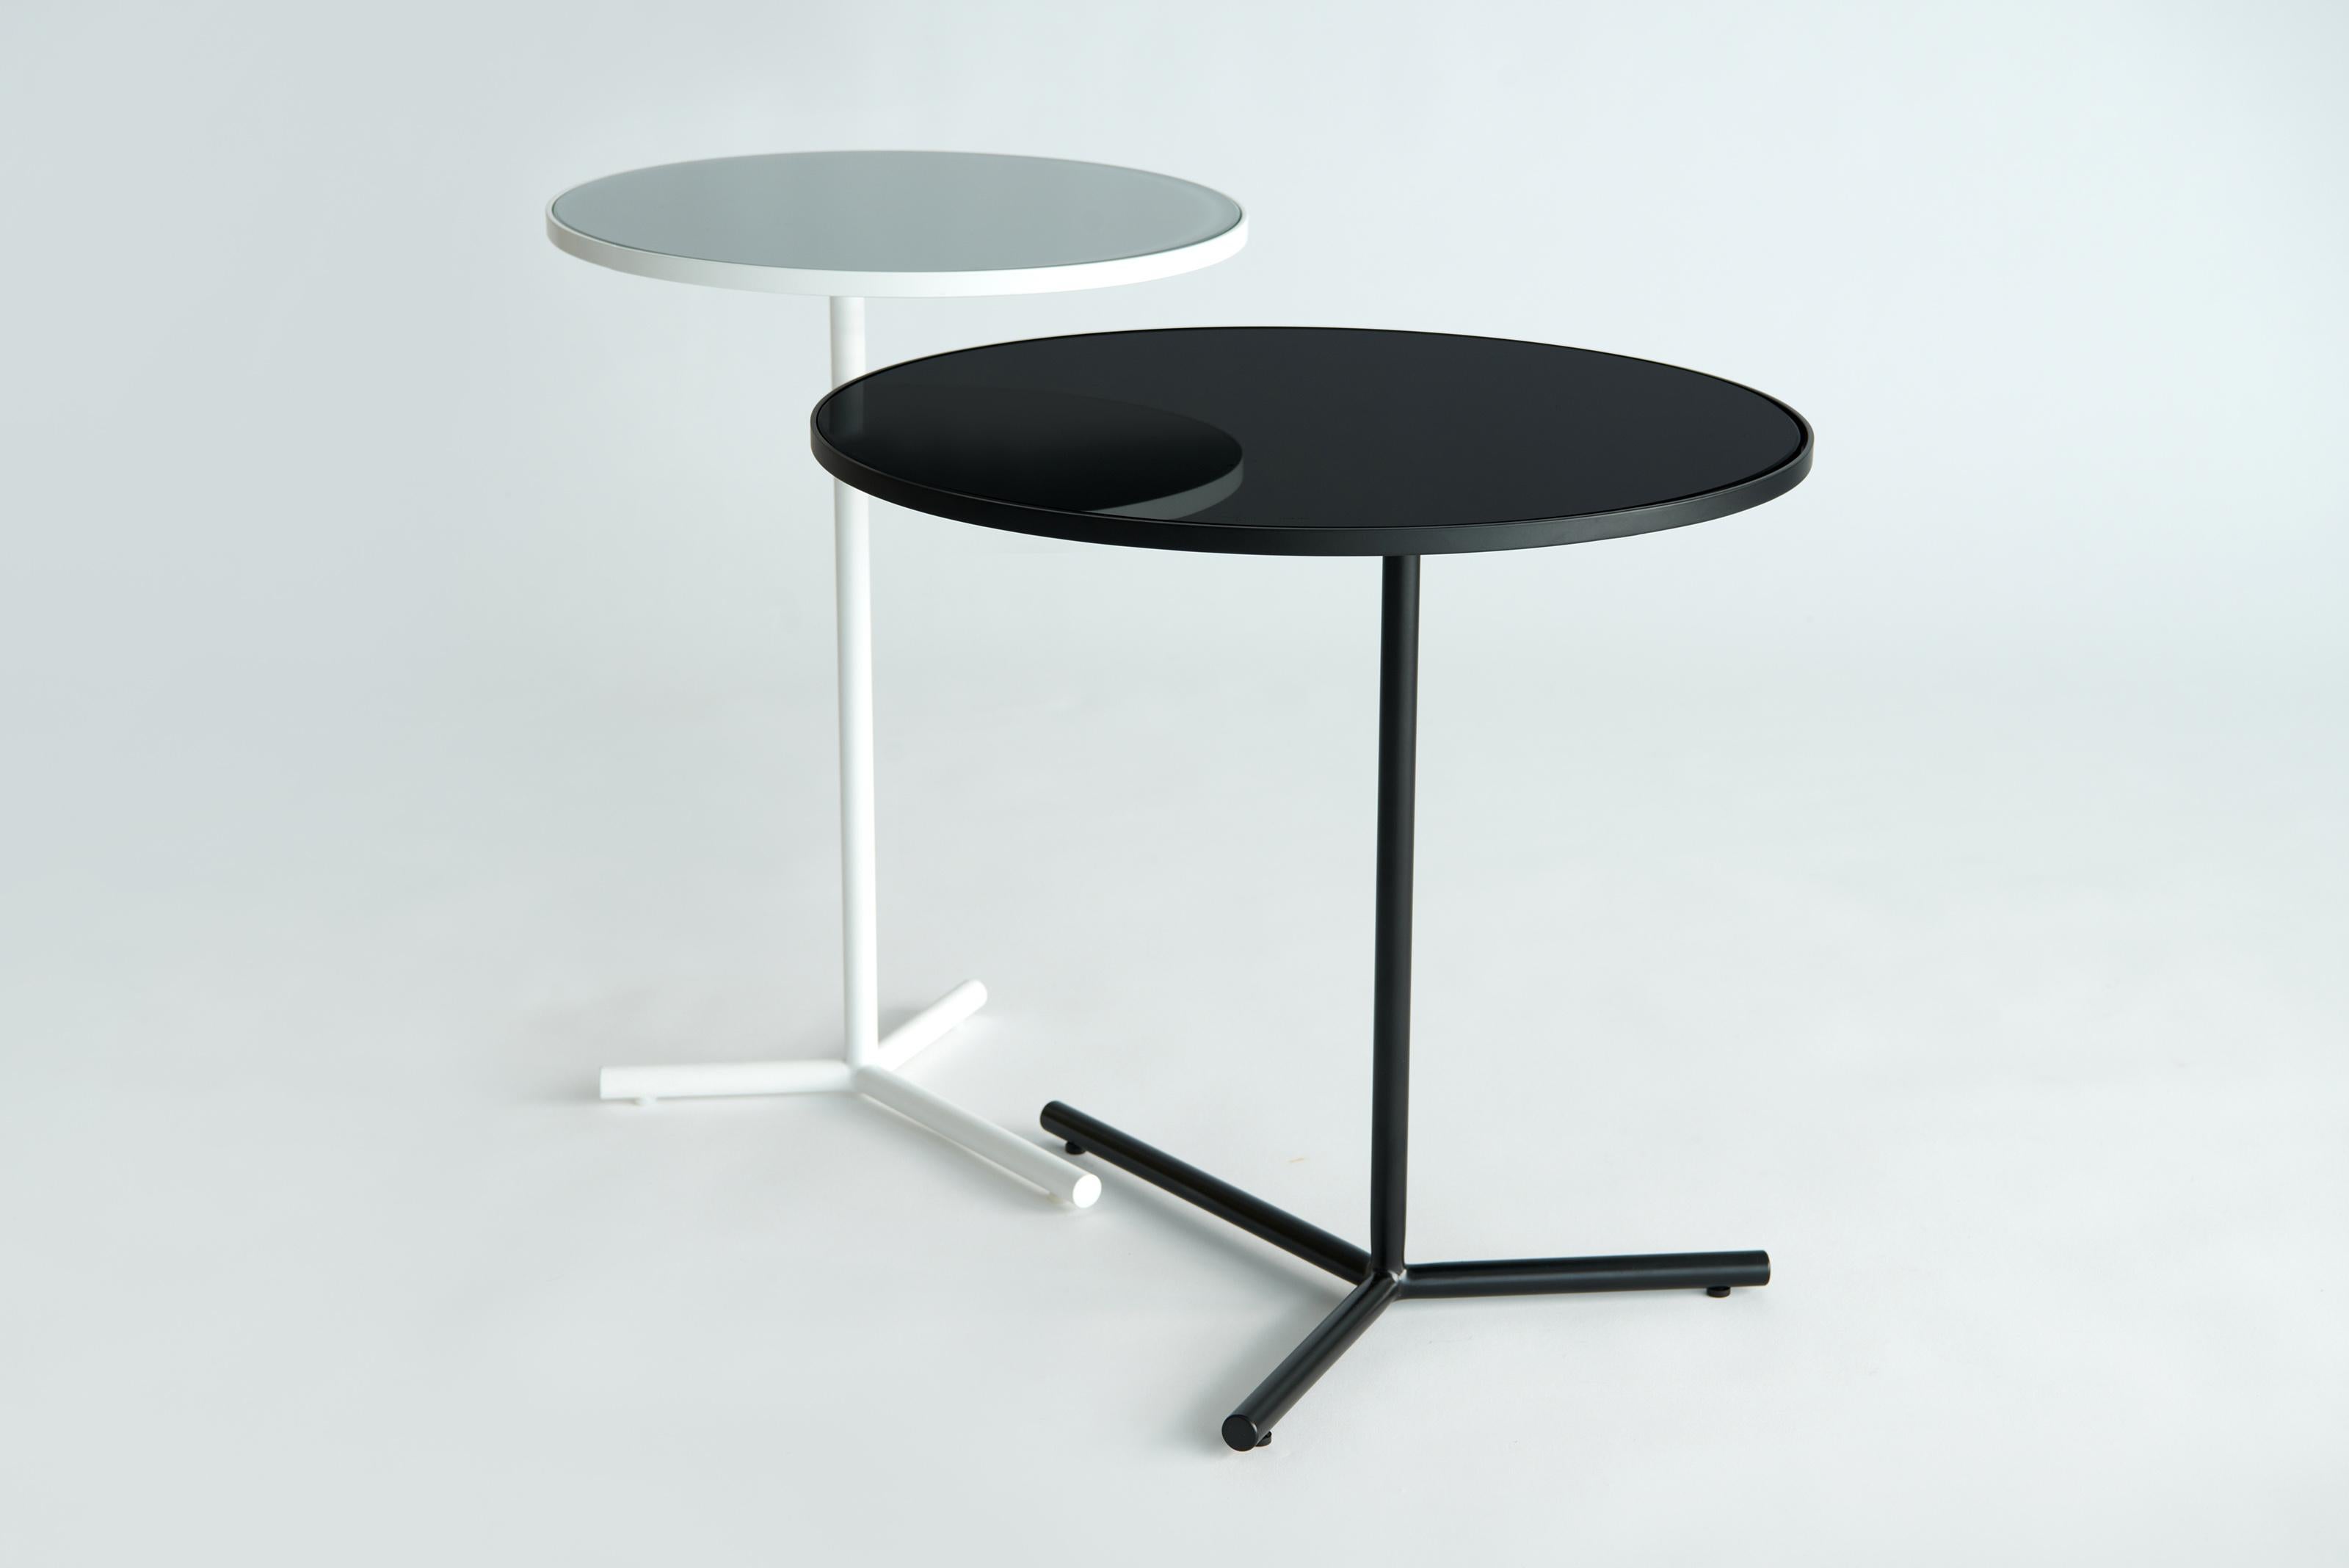 Set Of 2 Downtown Tables by Phase Design
Dimensions: Medium: Ø 50,8 x H 45,7 cm. 
Small: Ø 38,1 x H 53,34 cm.
Materials: Spandrel glass and powder-coated steel.

Solid steel base available in flat or gloss black and white powder coat, polished